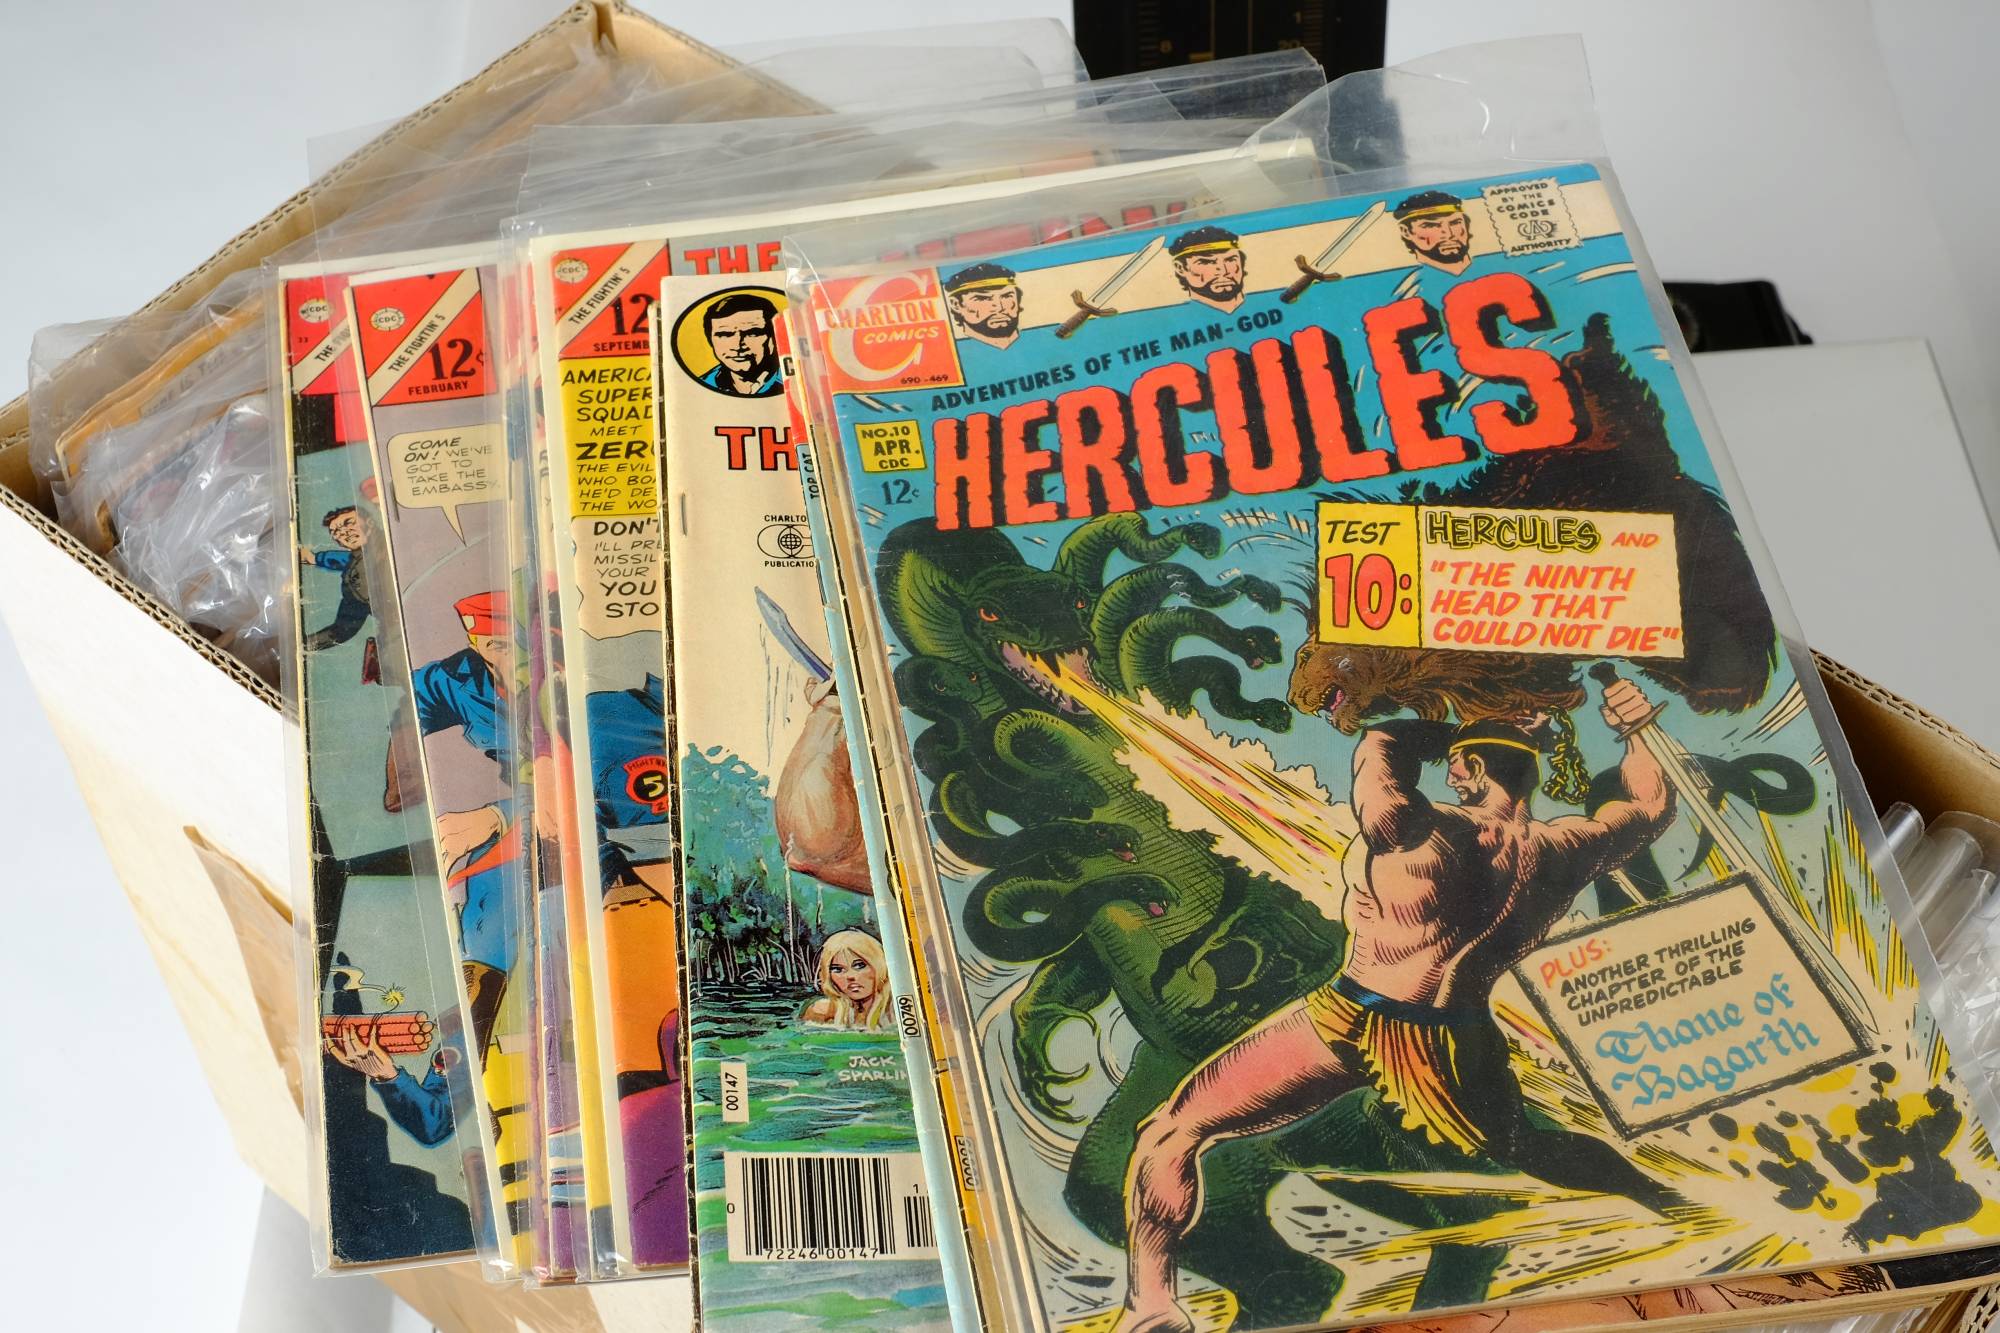 Comics. Approximately 190 comics by DC Comics and Charlton Comics from the Silver and Bronze Ages (